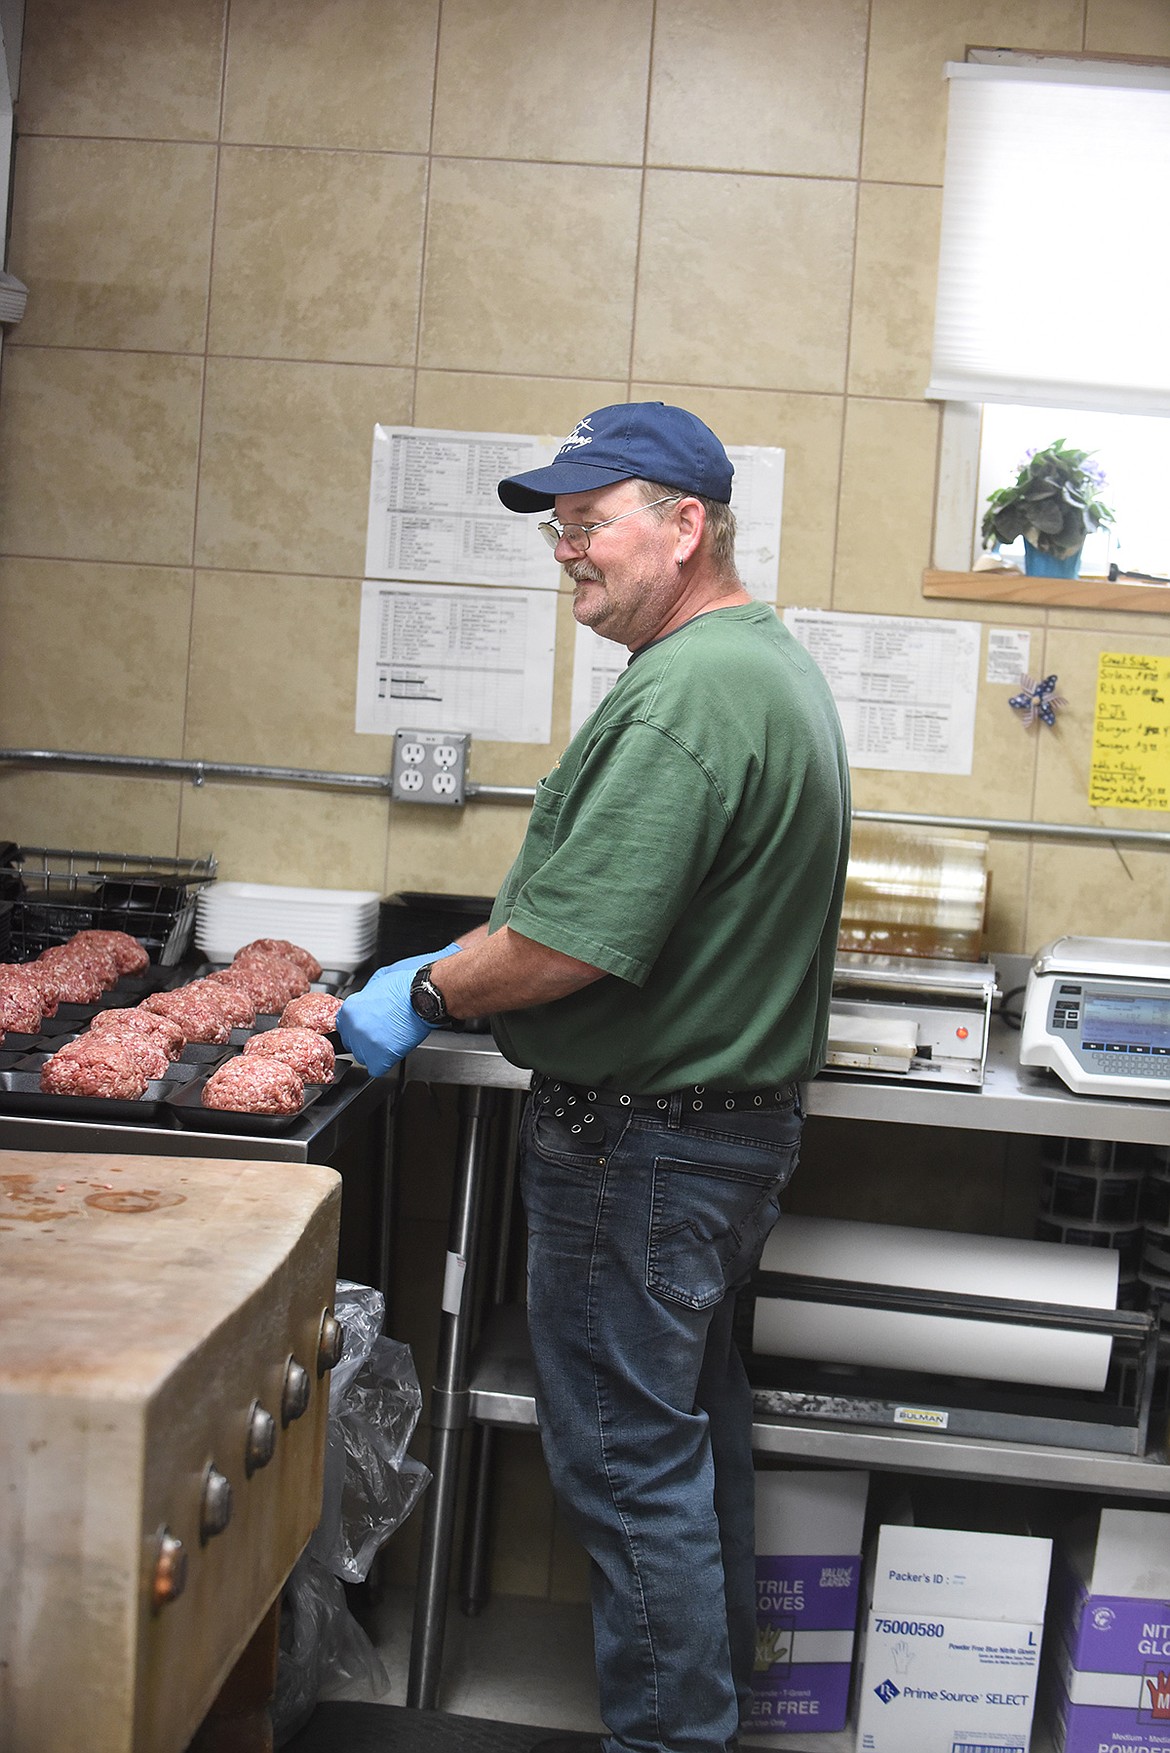 Meat department boss Michael Smale prepares the special sausage Buck’s Grocery in Hot Springs is known for making. (Scott Shindledecker/Valley Press)